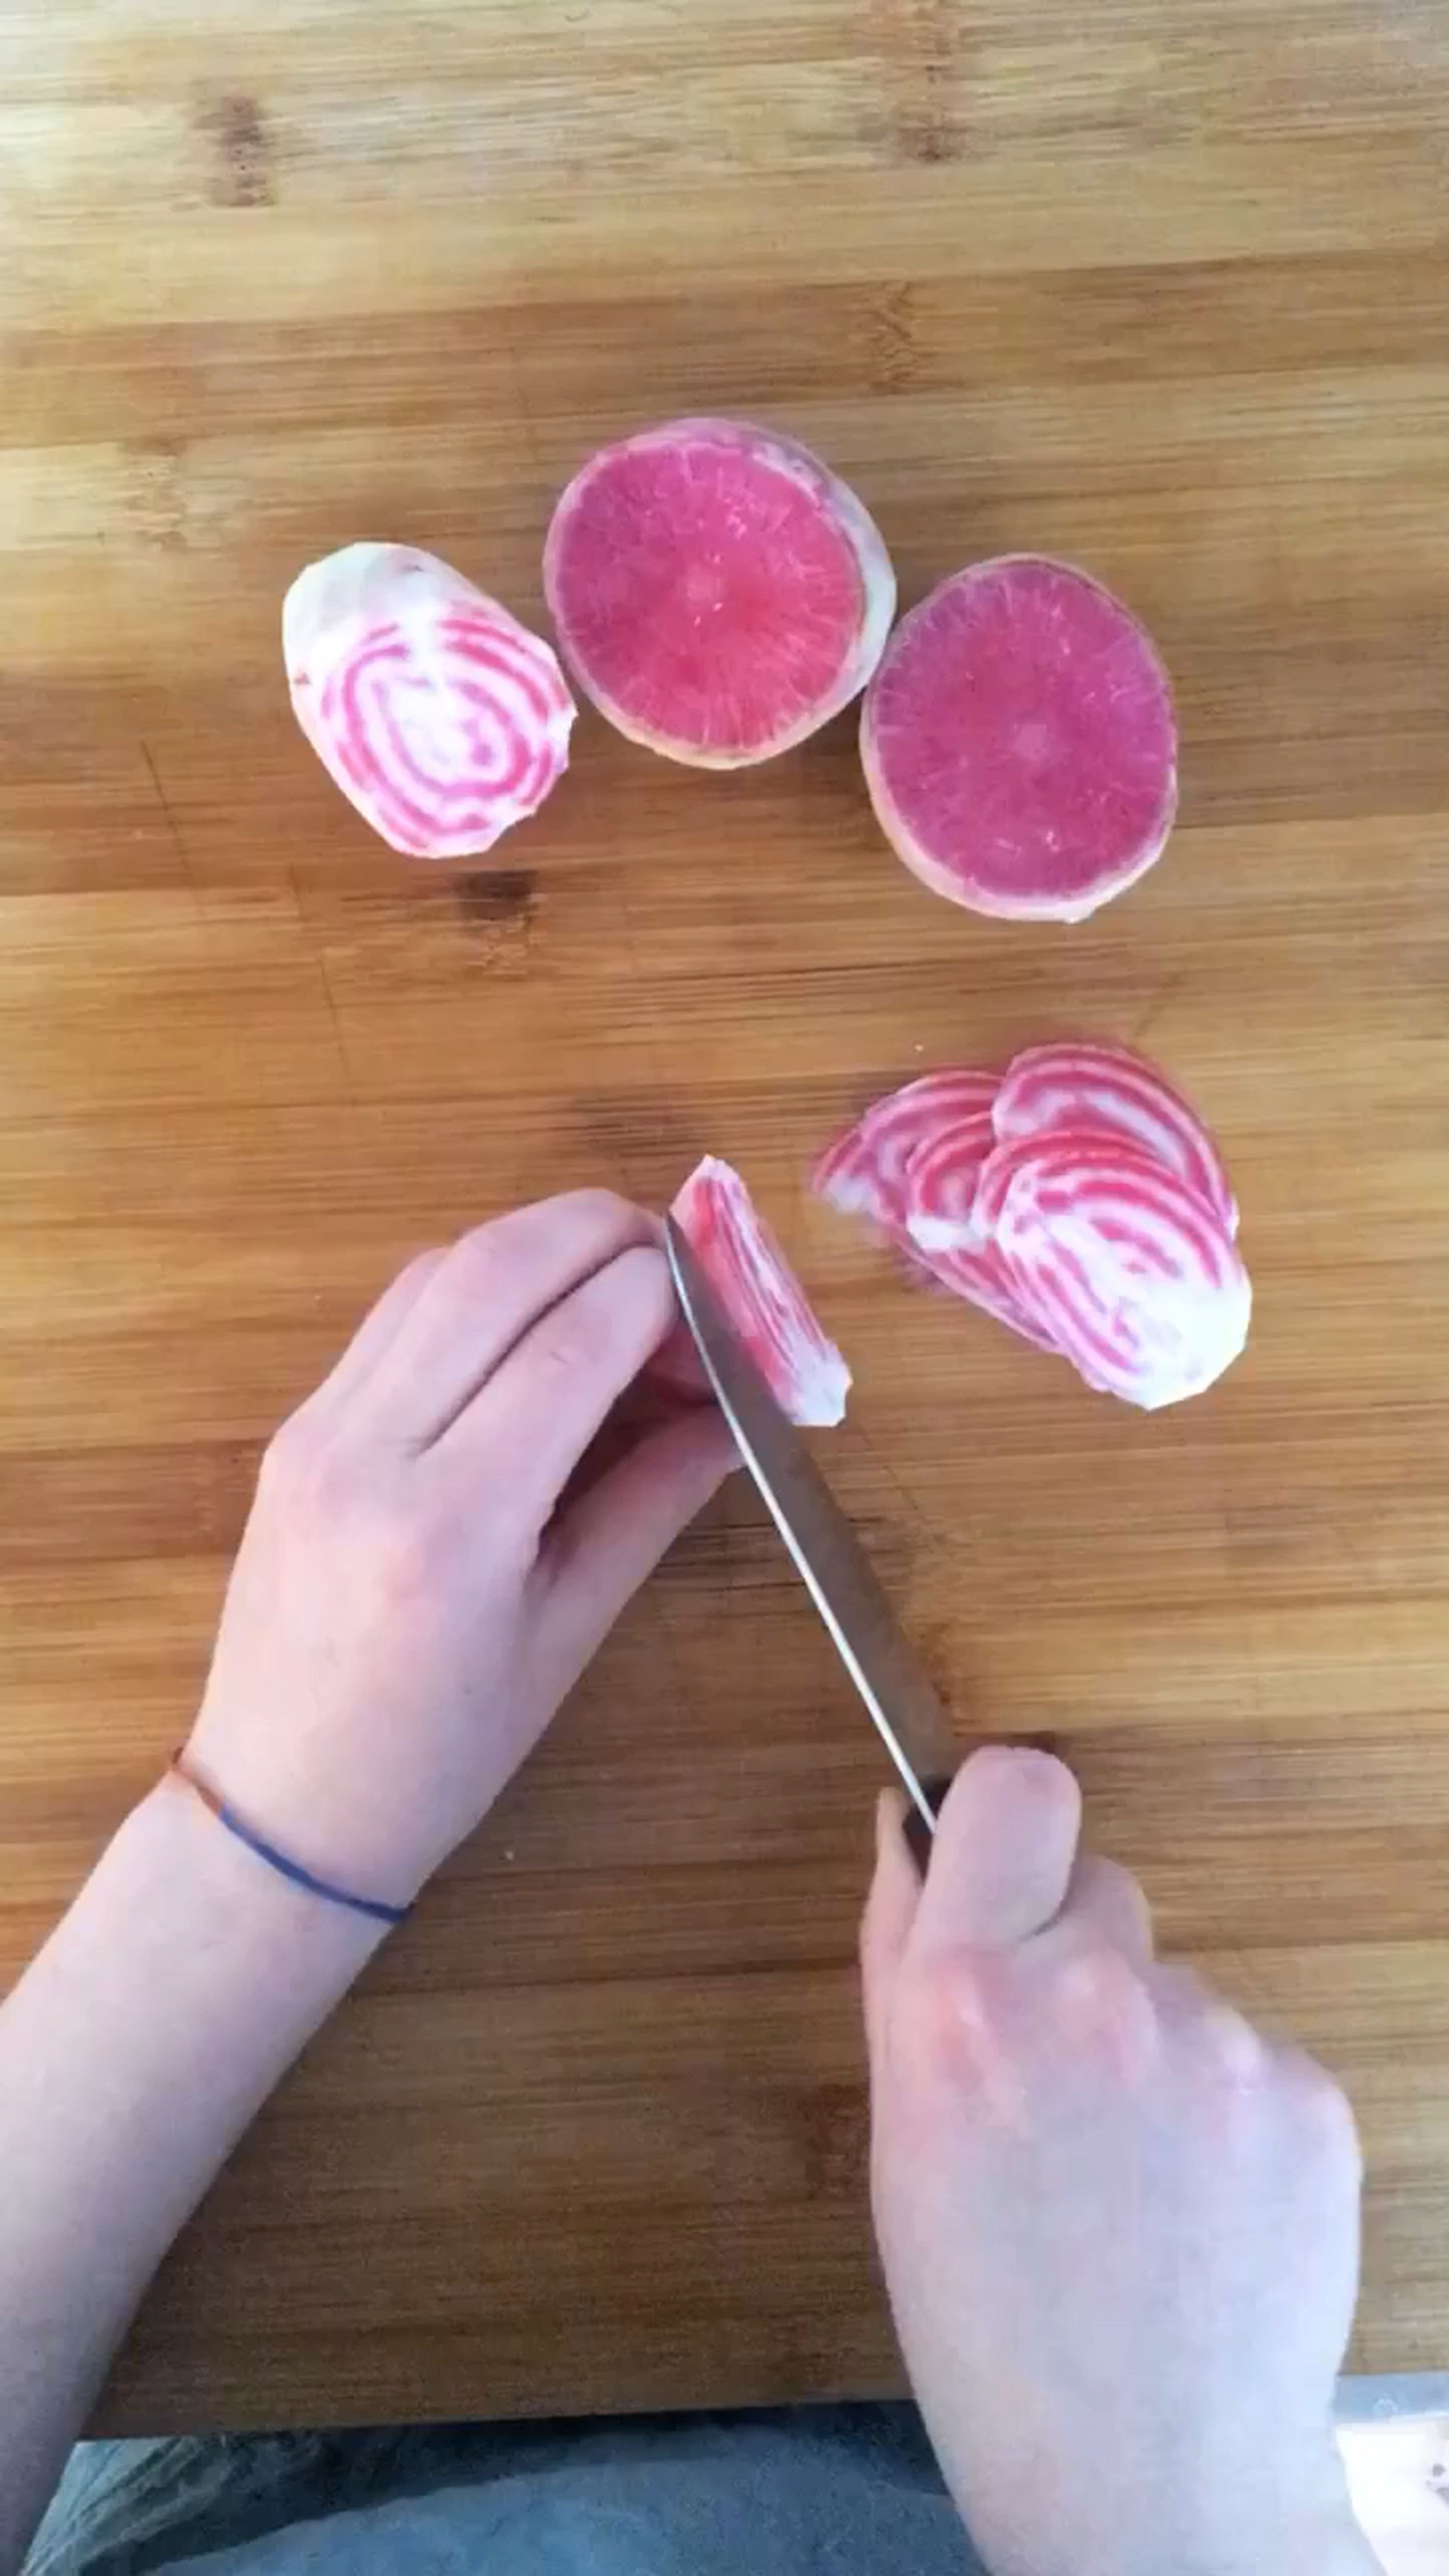 Peel the beets and thinly slice.